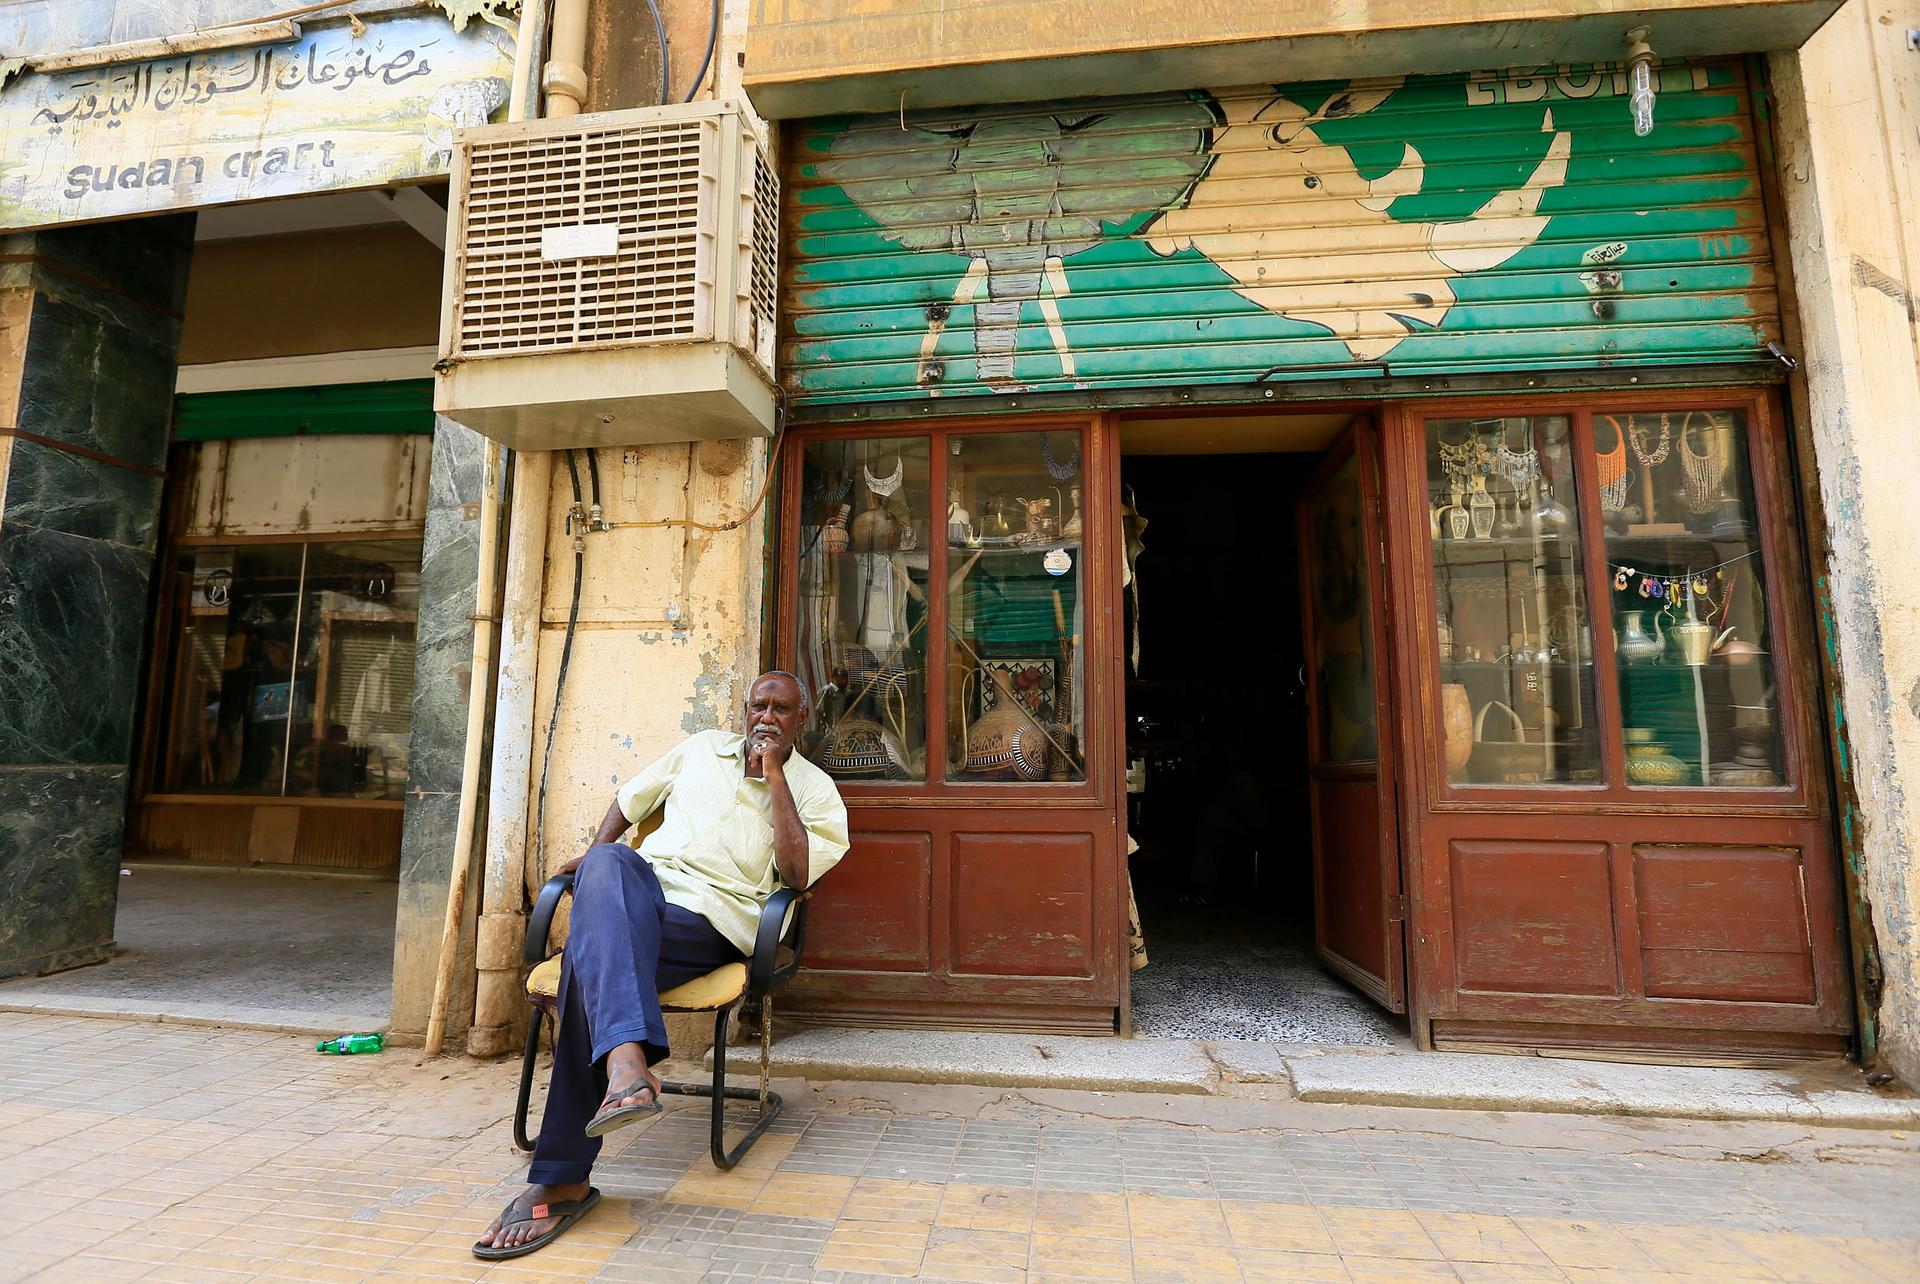 A man is shown sitting with his legs crossed in a chair outside of a shop with windows diplaying antiques.